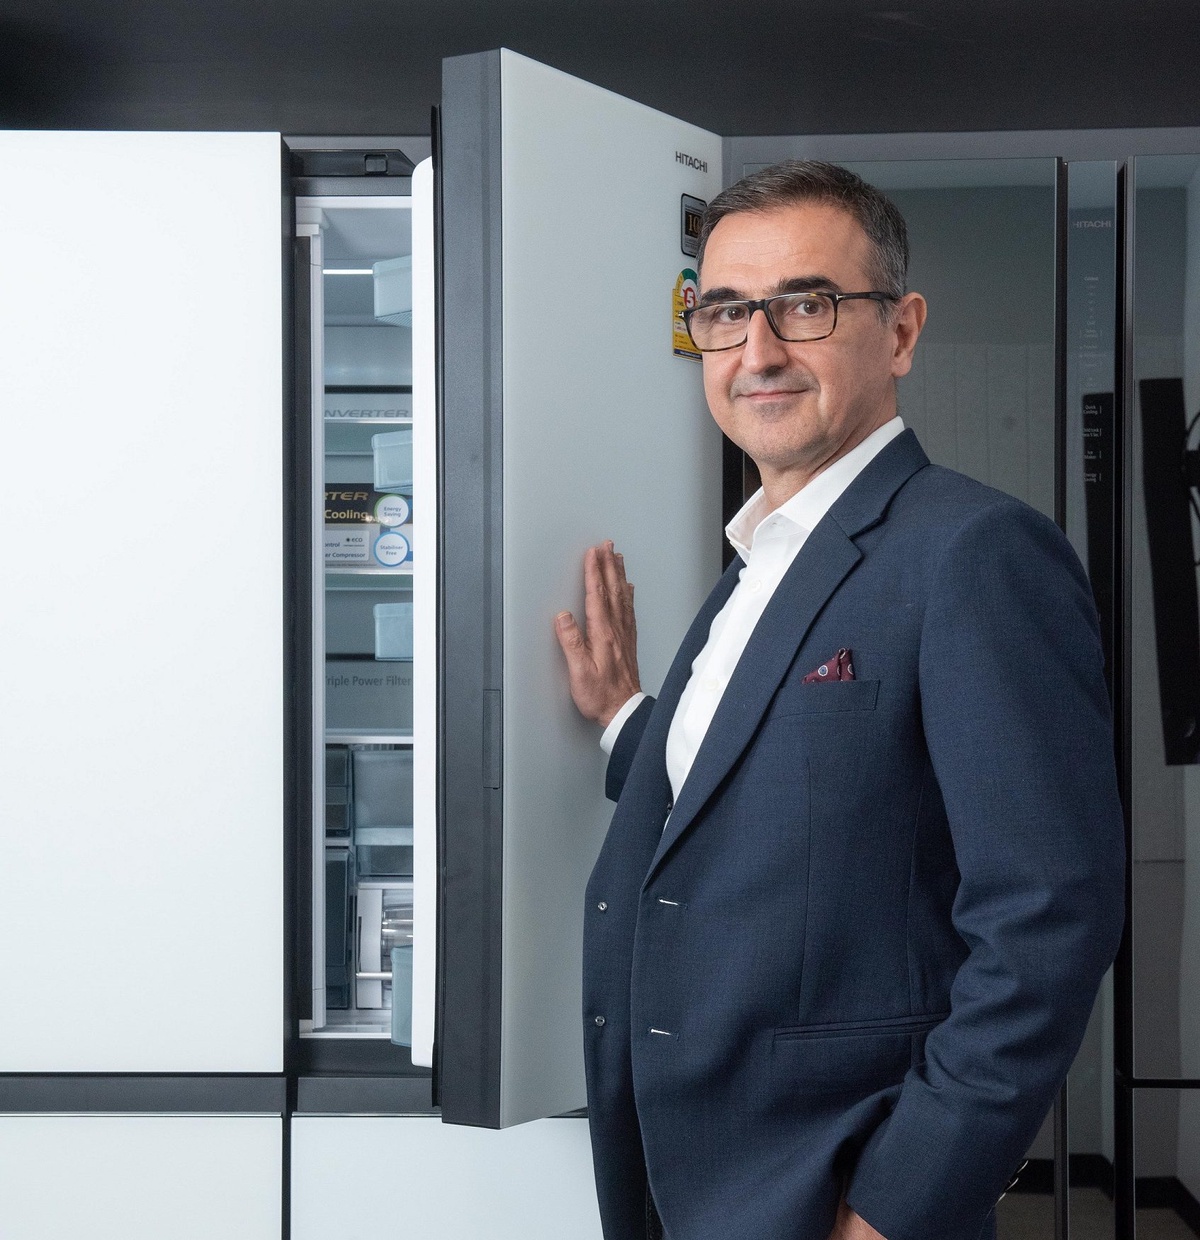 Arcelik Hitachi reaches a 22 million production milestone of refrigerators in Thailand and receives ISO Certification for its efficient energy management